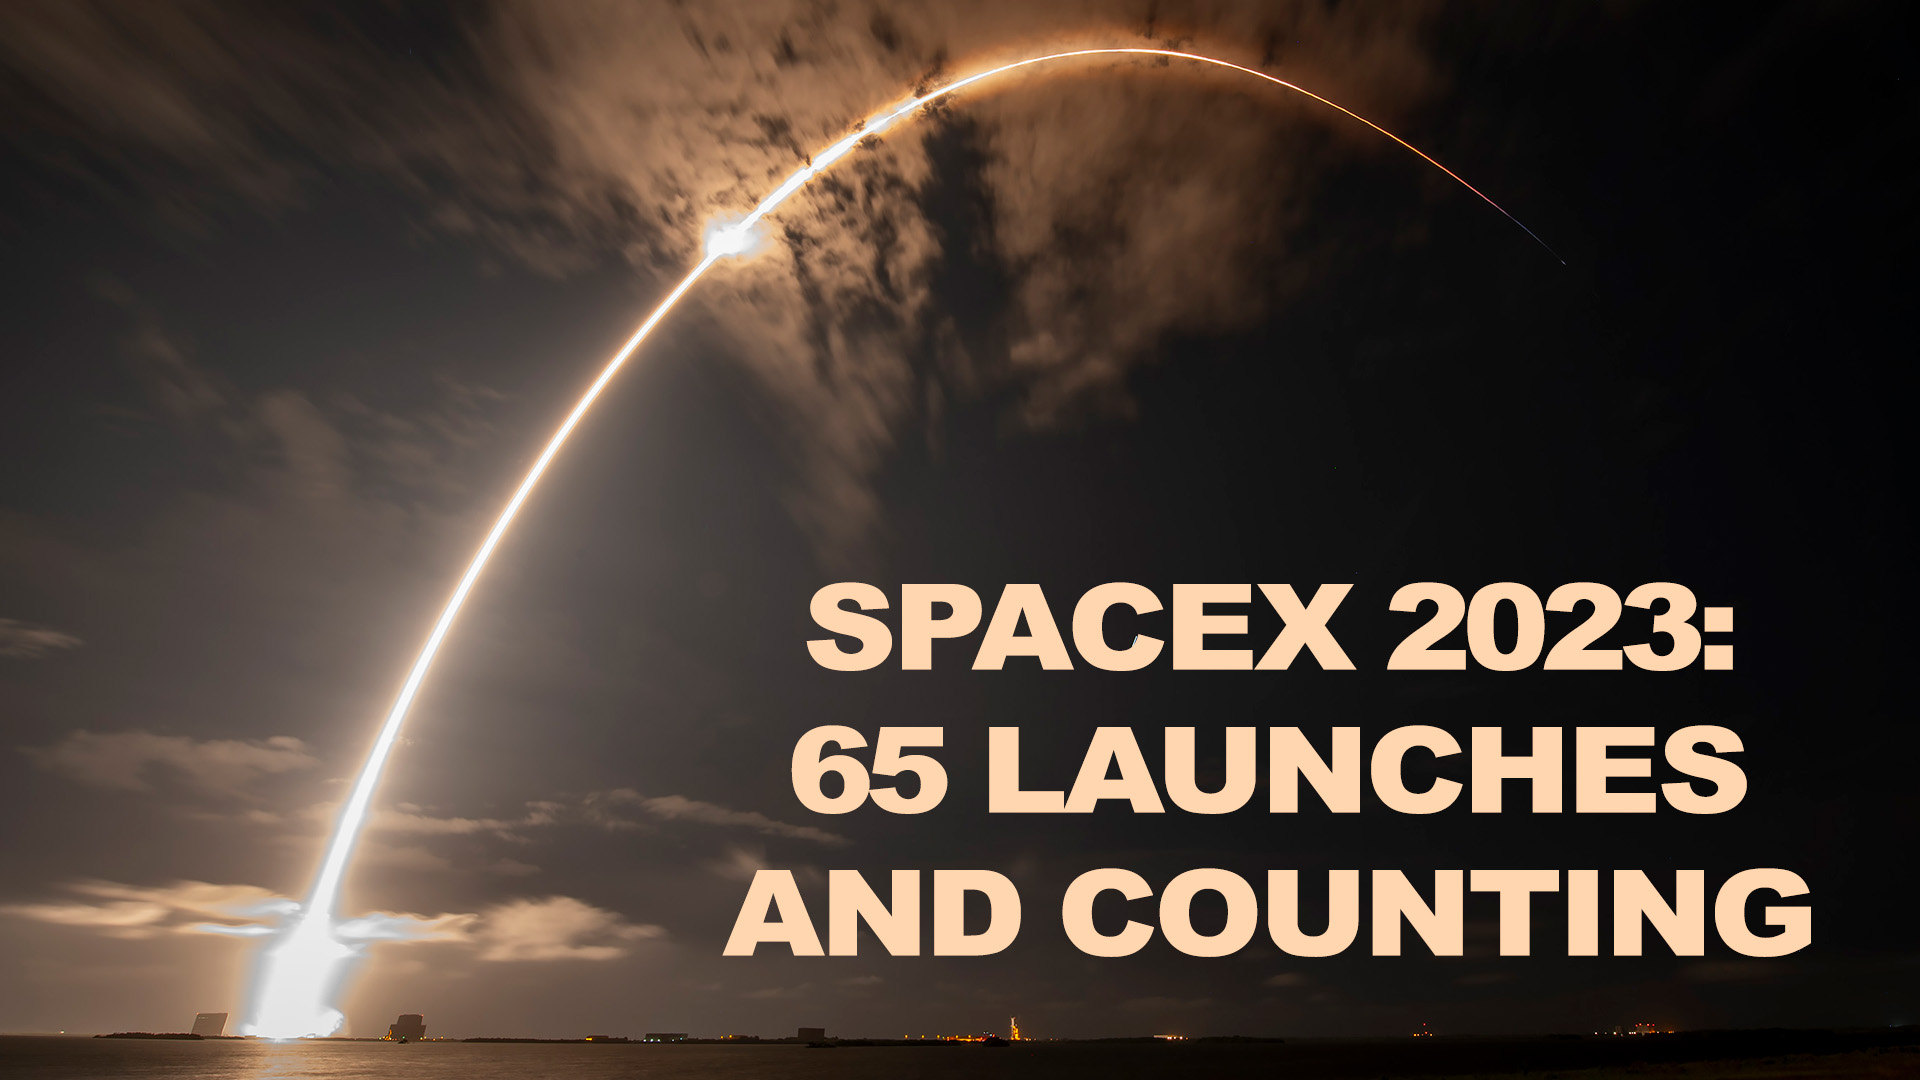 SpaceX News Falcon-9 Launch of Starlink Satellites 9-15-2023 SpaceX's 65th 2023 Launch to Date